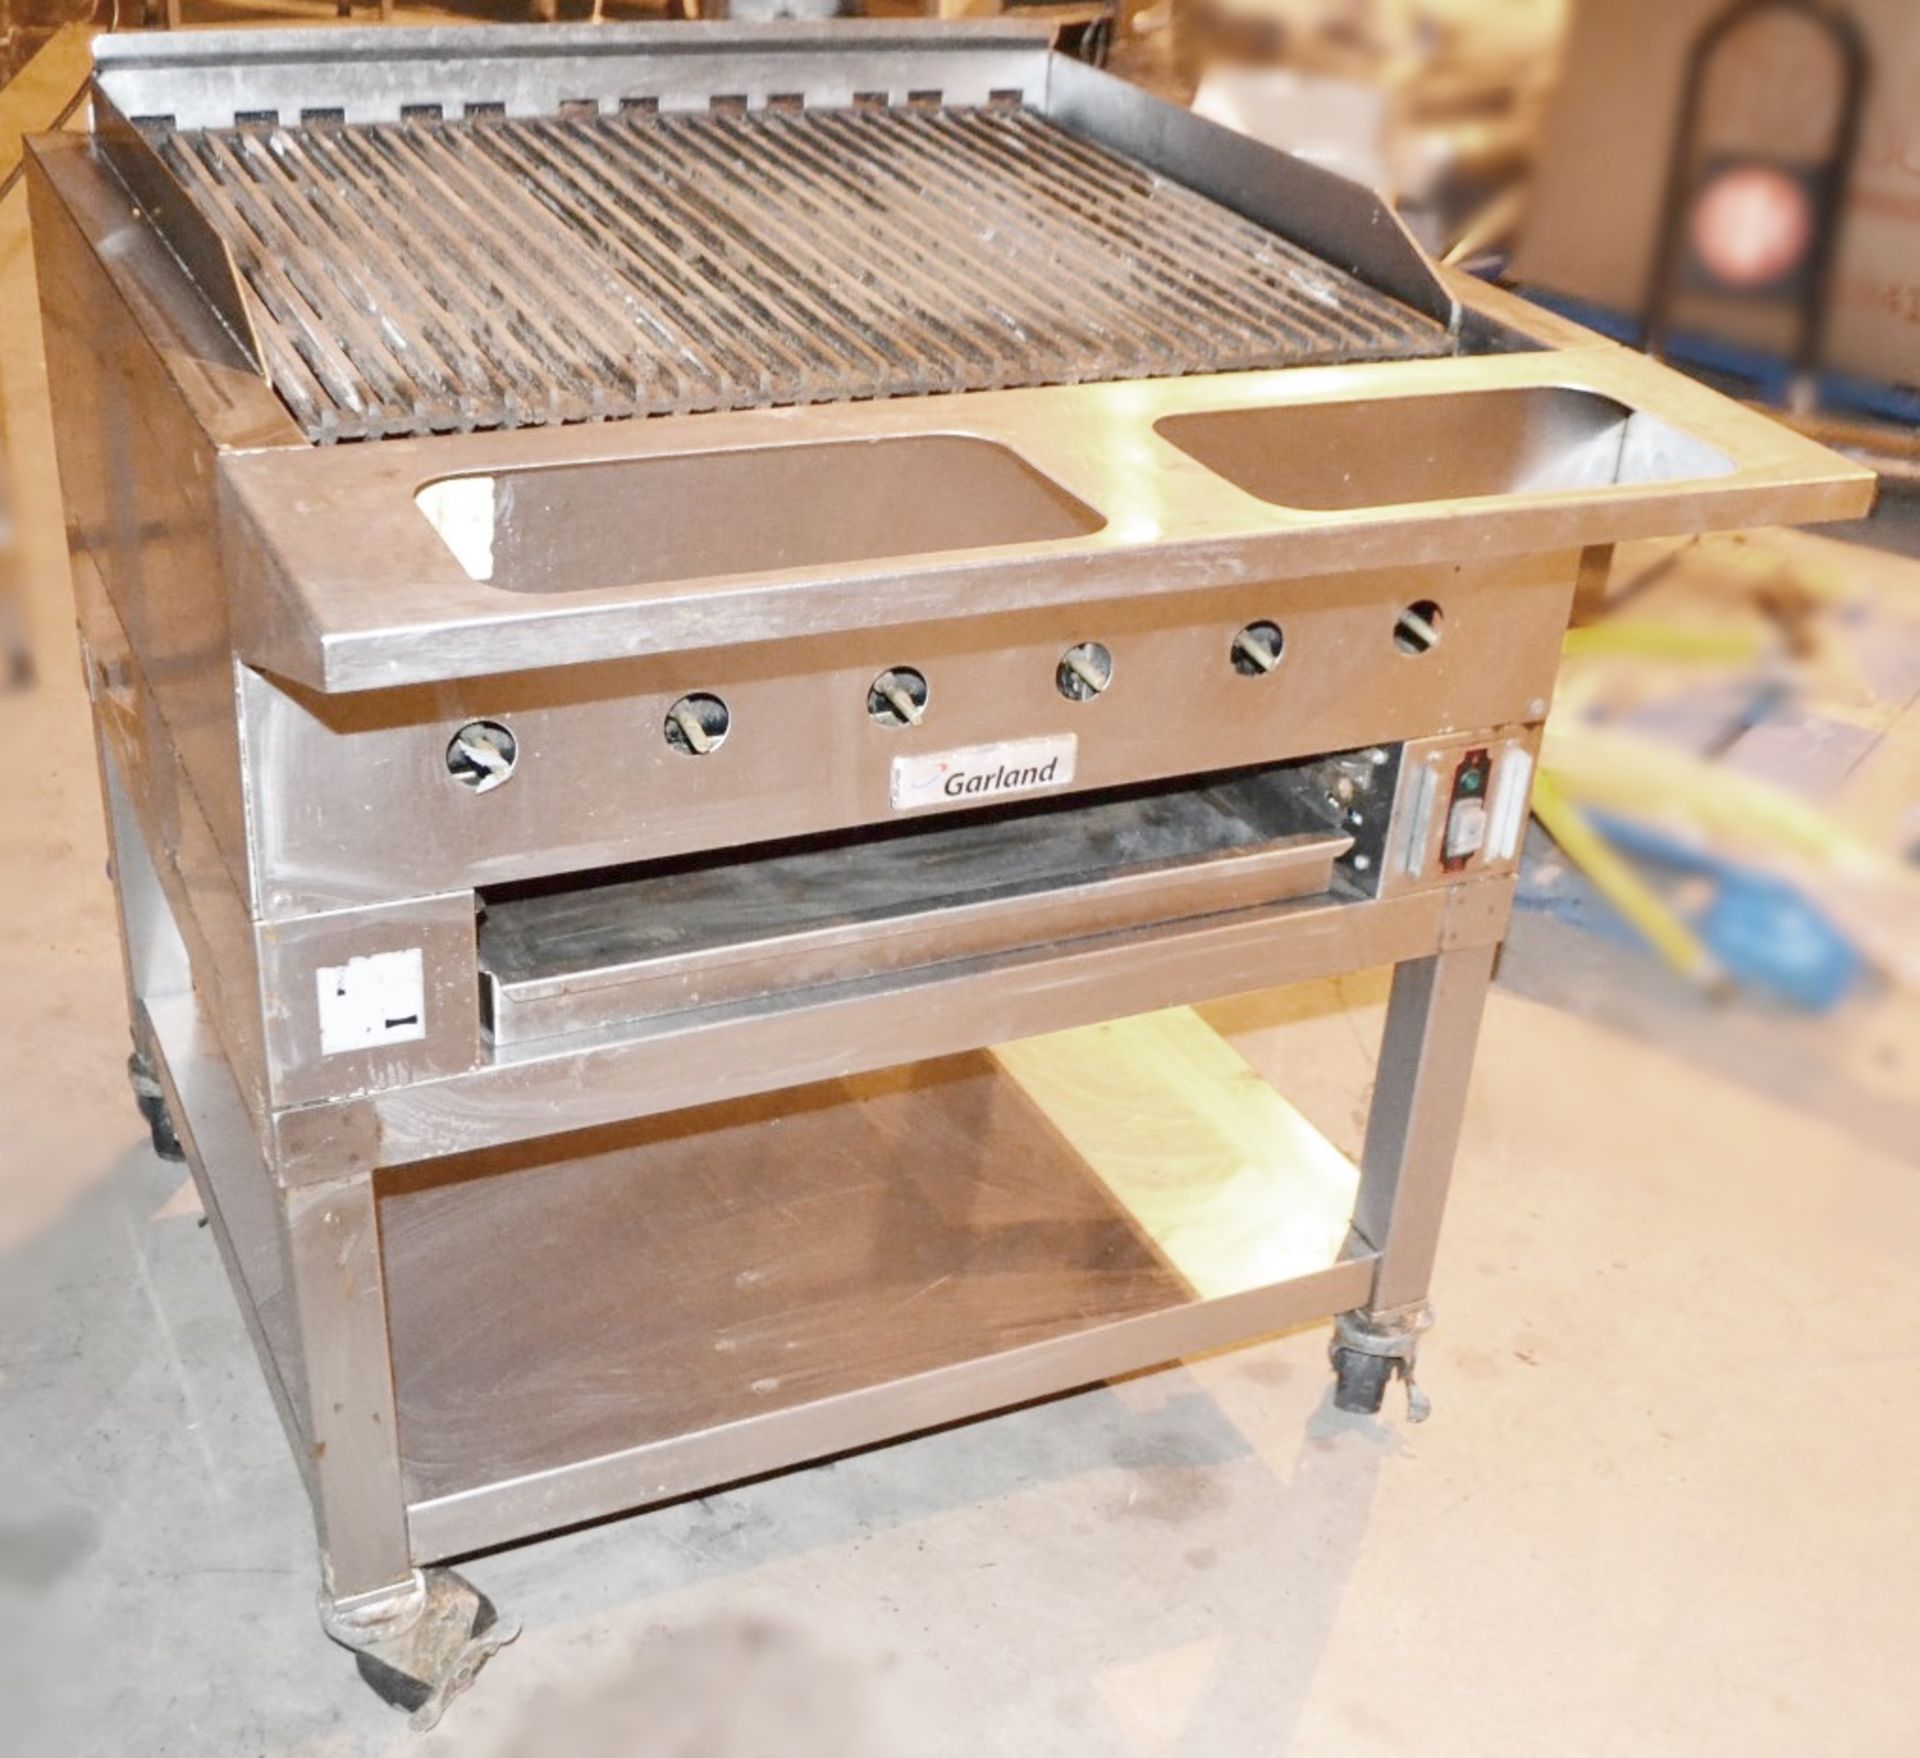 1 x Stainless Steel GARLAND Commercial Griddle With Stand - CL350 - Ref212 - Location: Altrincham - Image 2 of 4